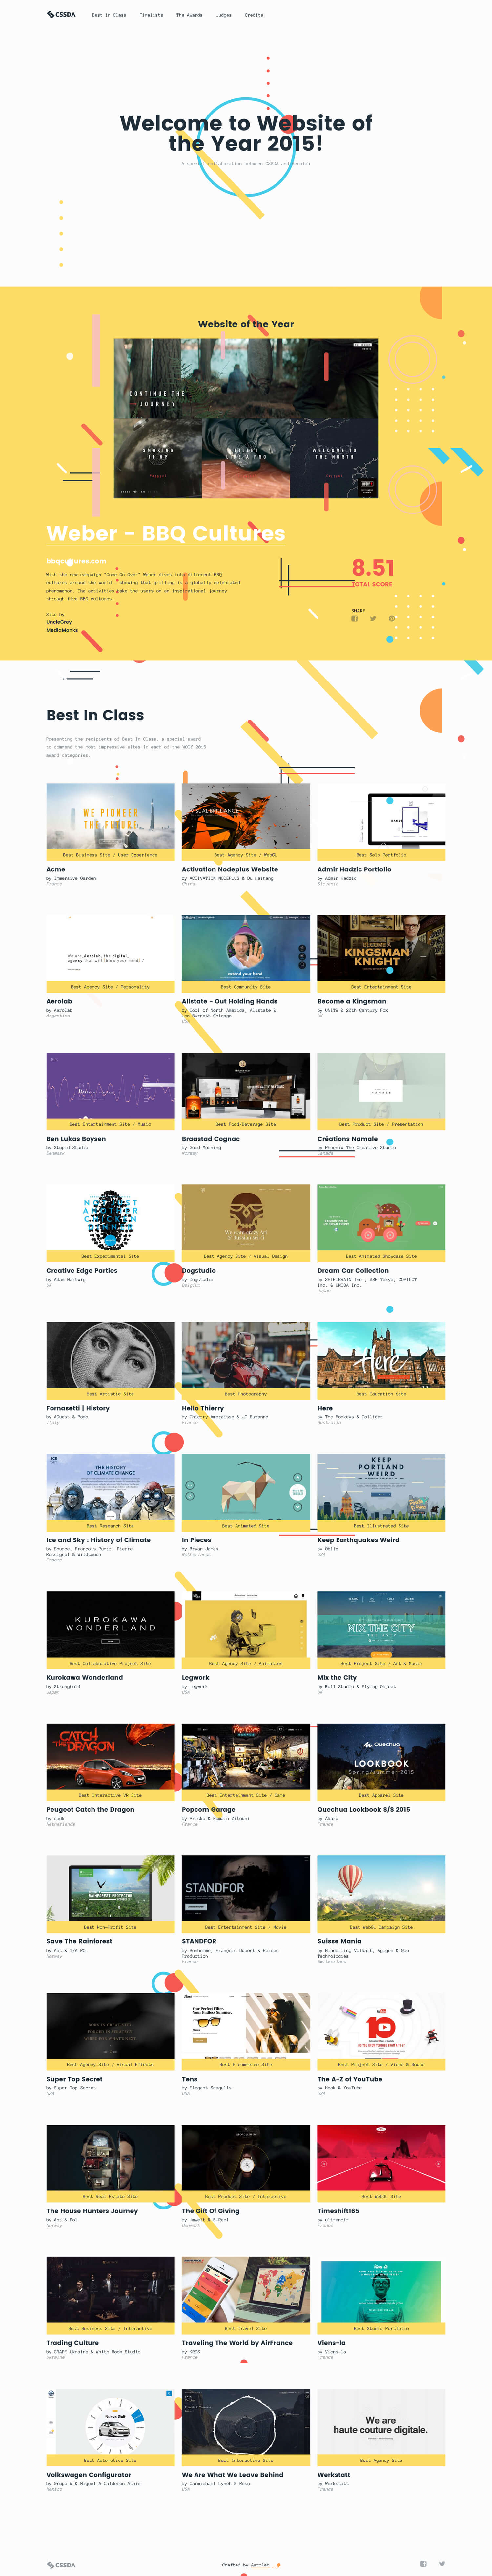 Website of the Year 2015 – CSS Design Awards